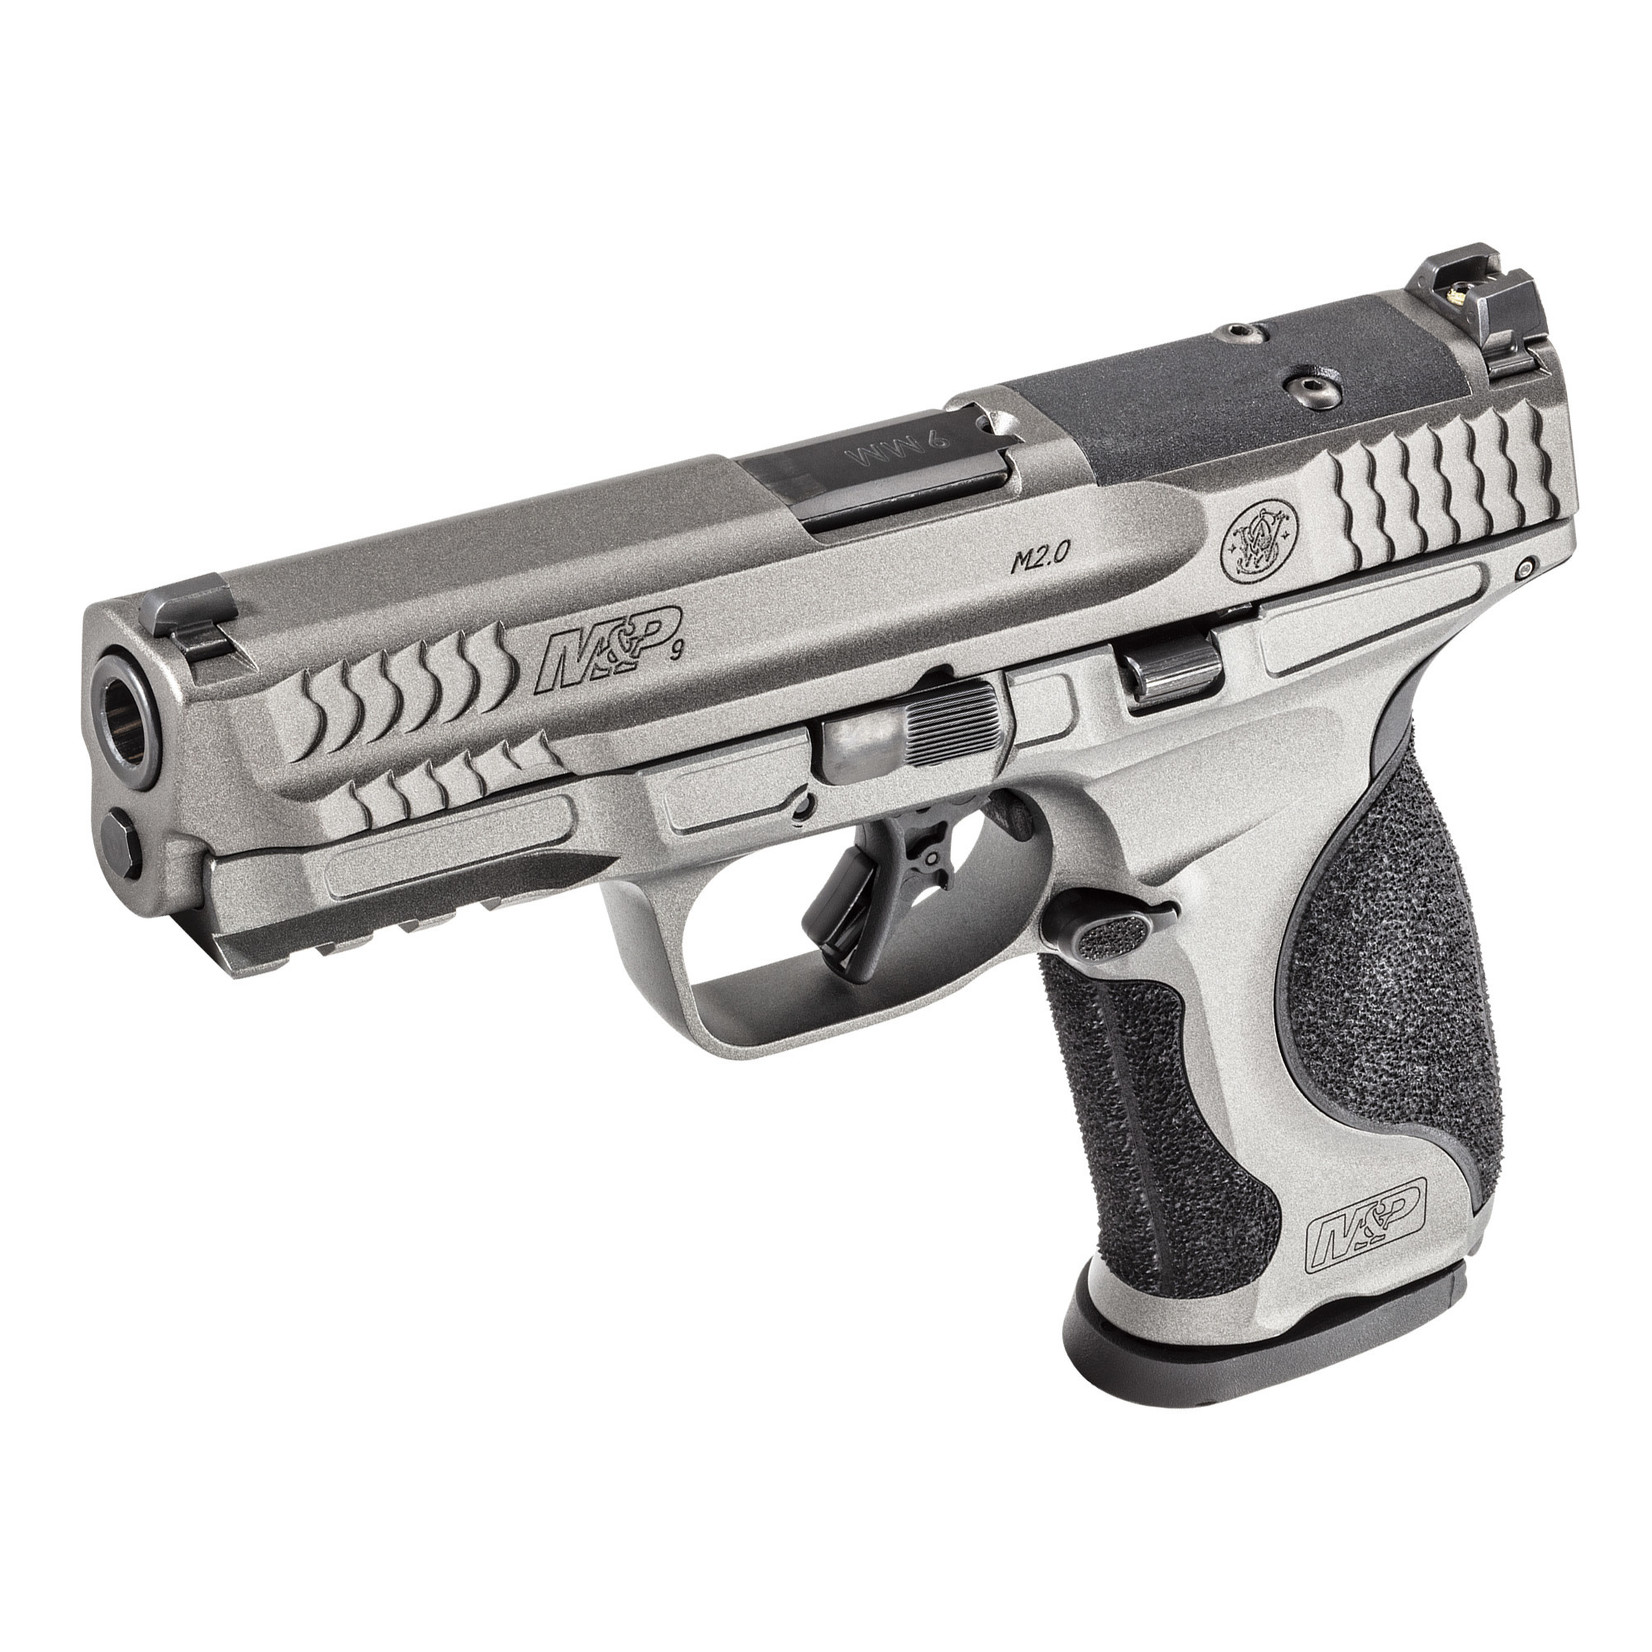 SMITH & WESSON SMITH & WESSON M&P9 M2.0 METAL 9MM 17RD 4.25" BBL